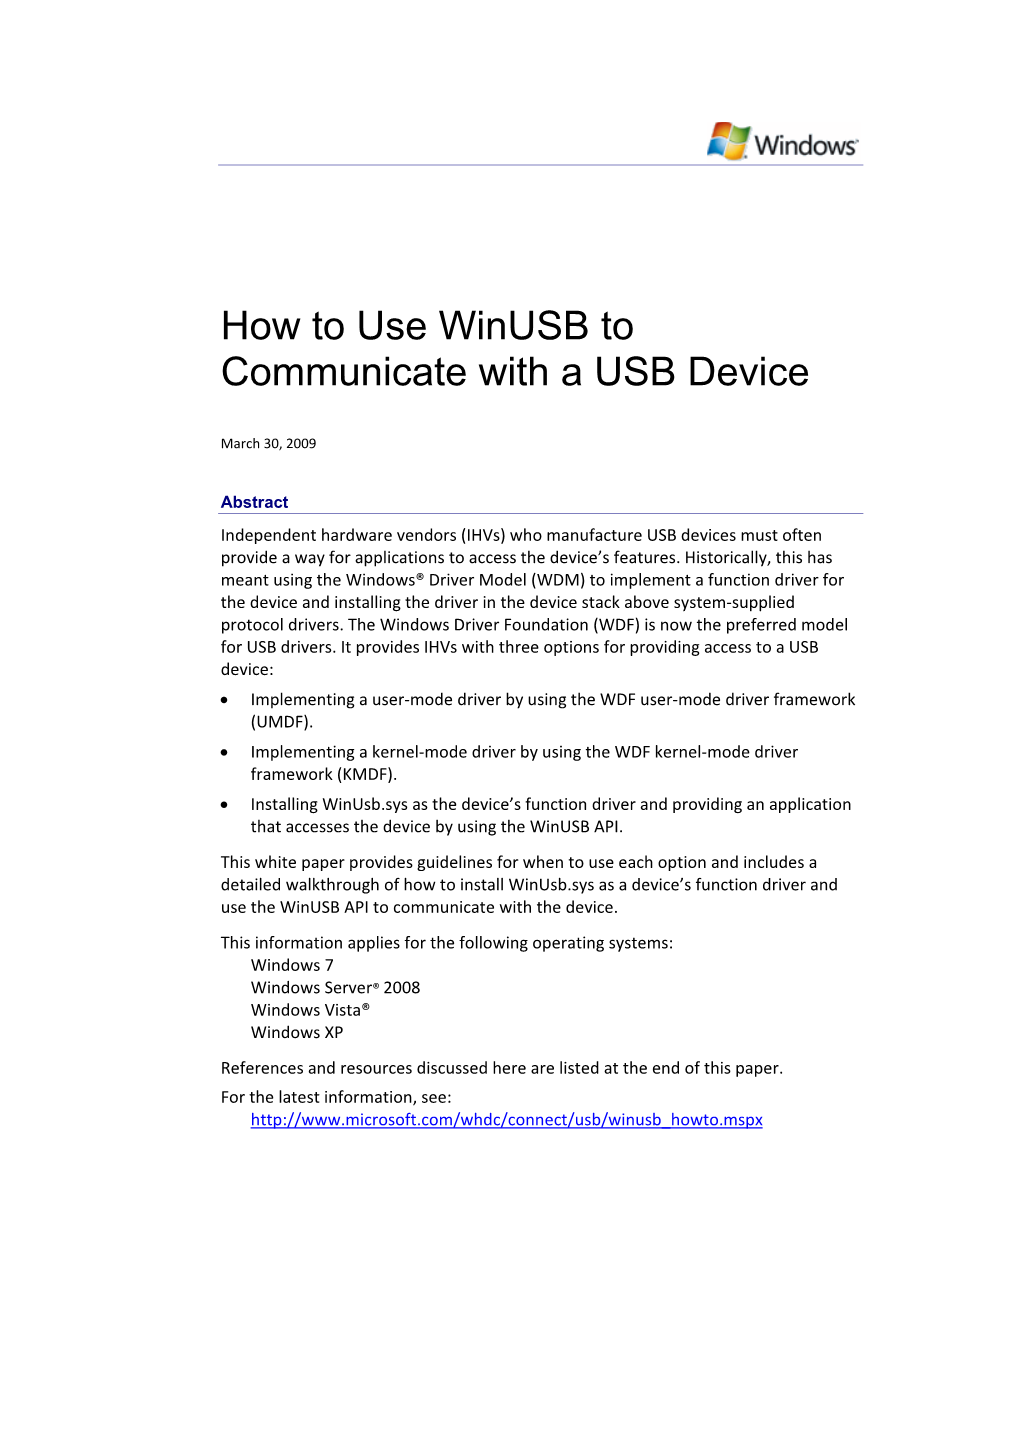 How to Use Winusb to Communicate with a USB Device